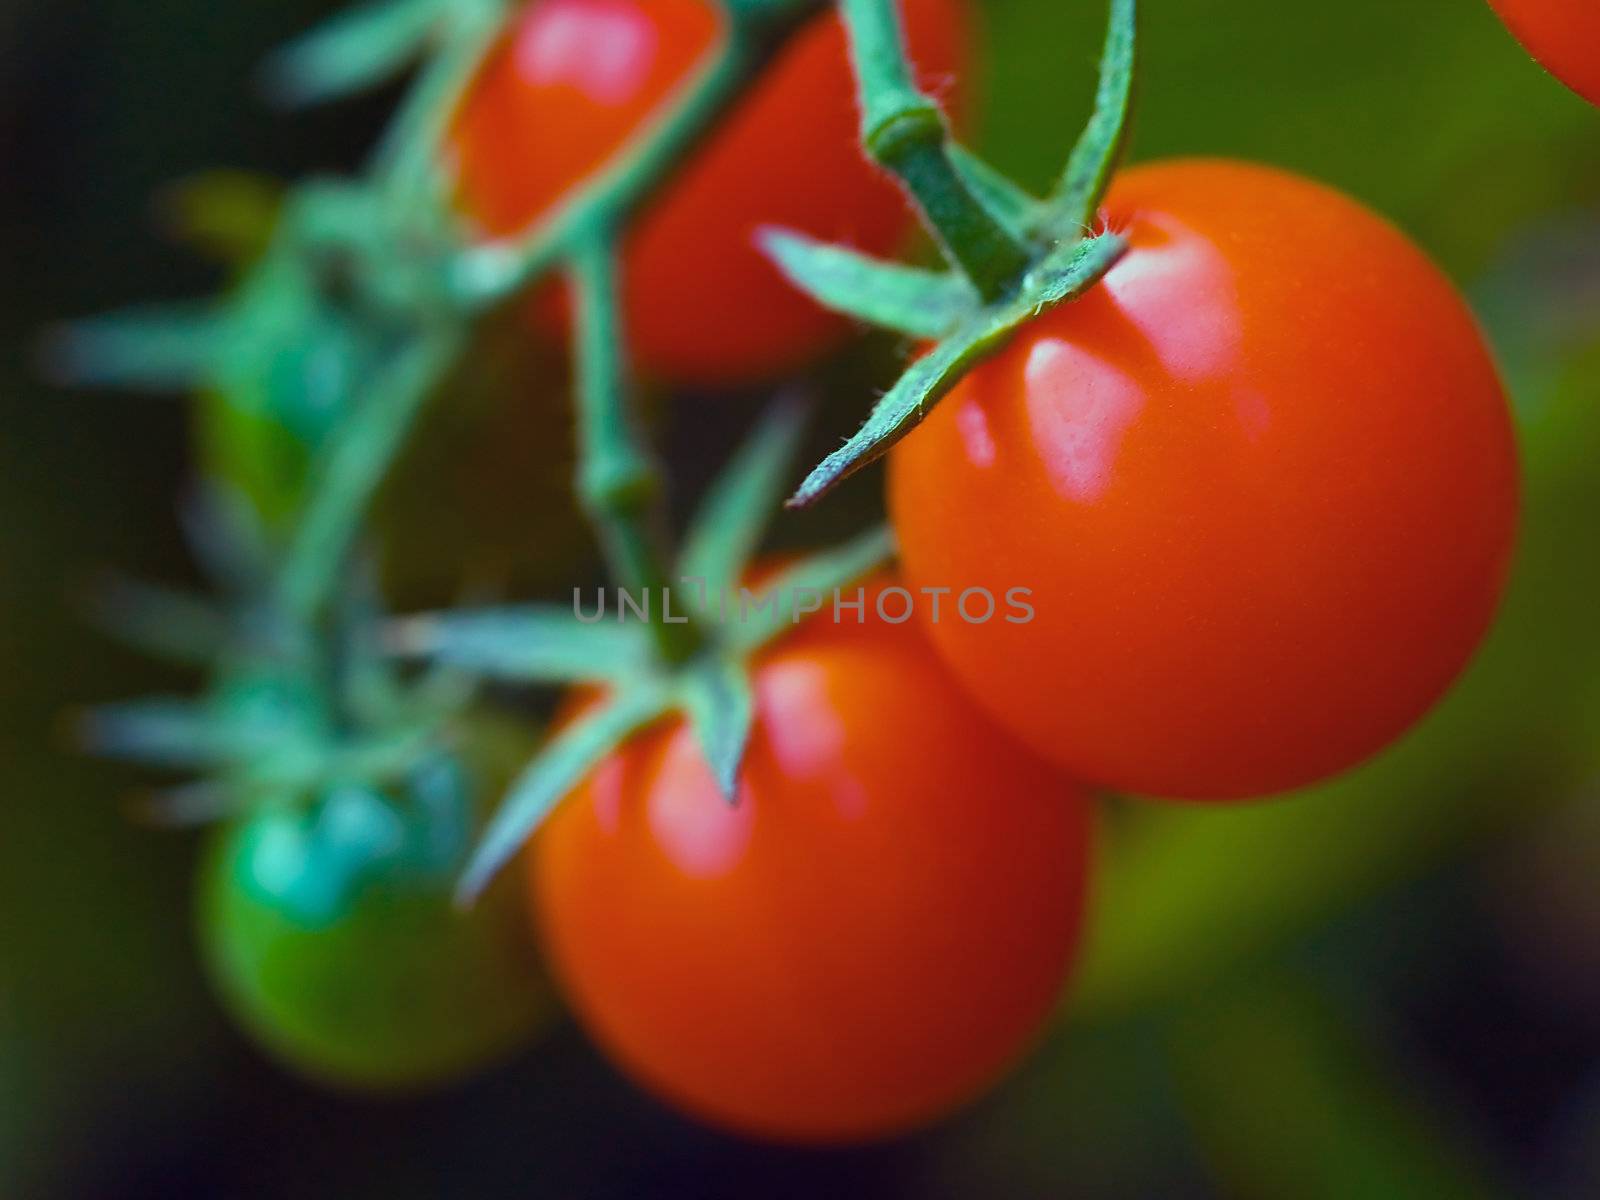 Red, ripe tomatoes still on the vine awaiting to be harvested.